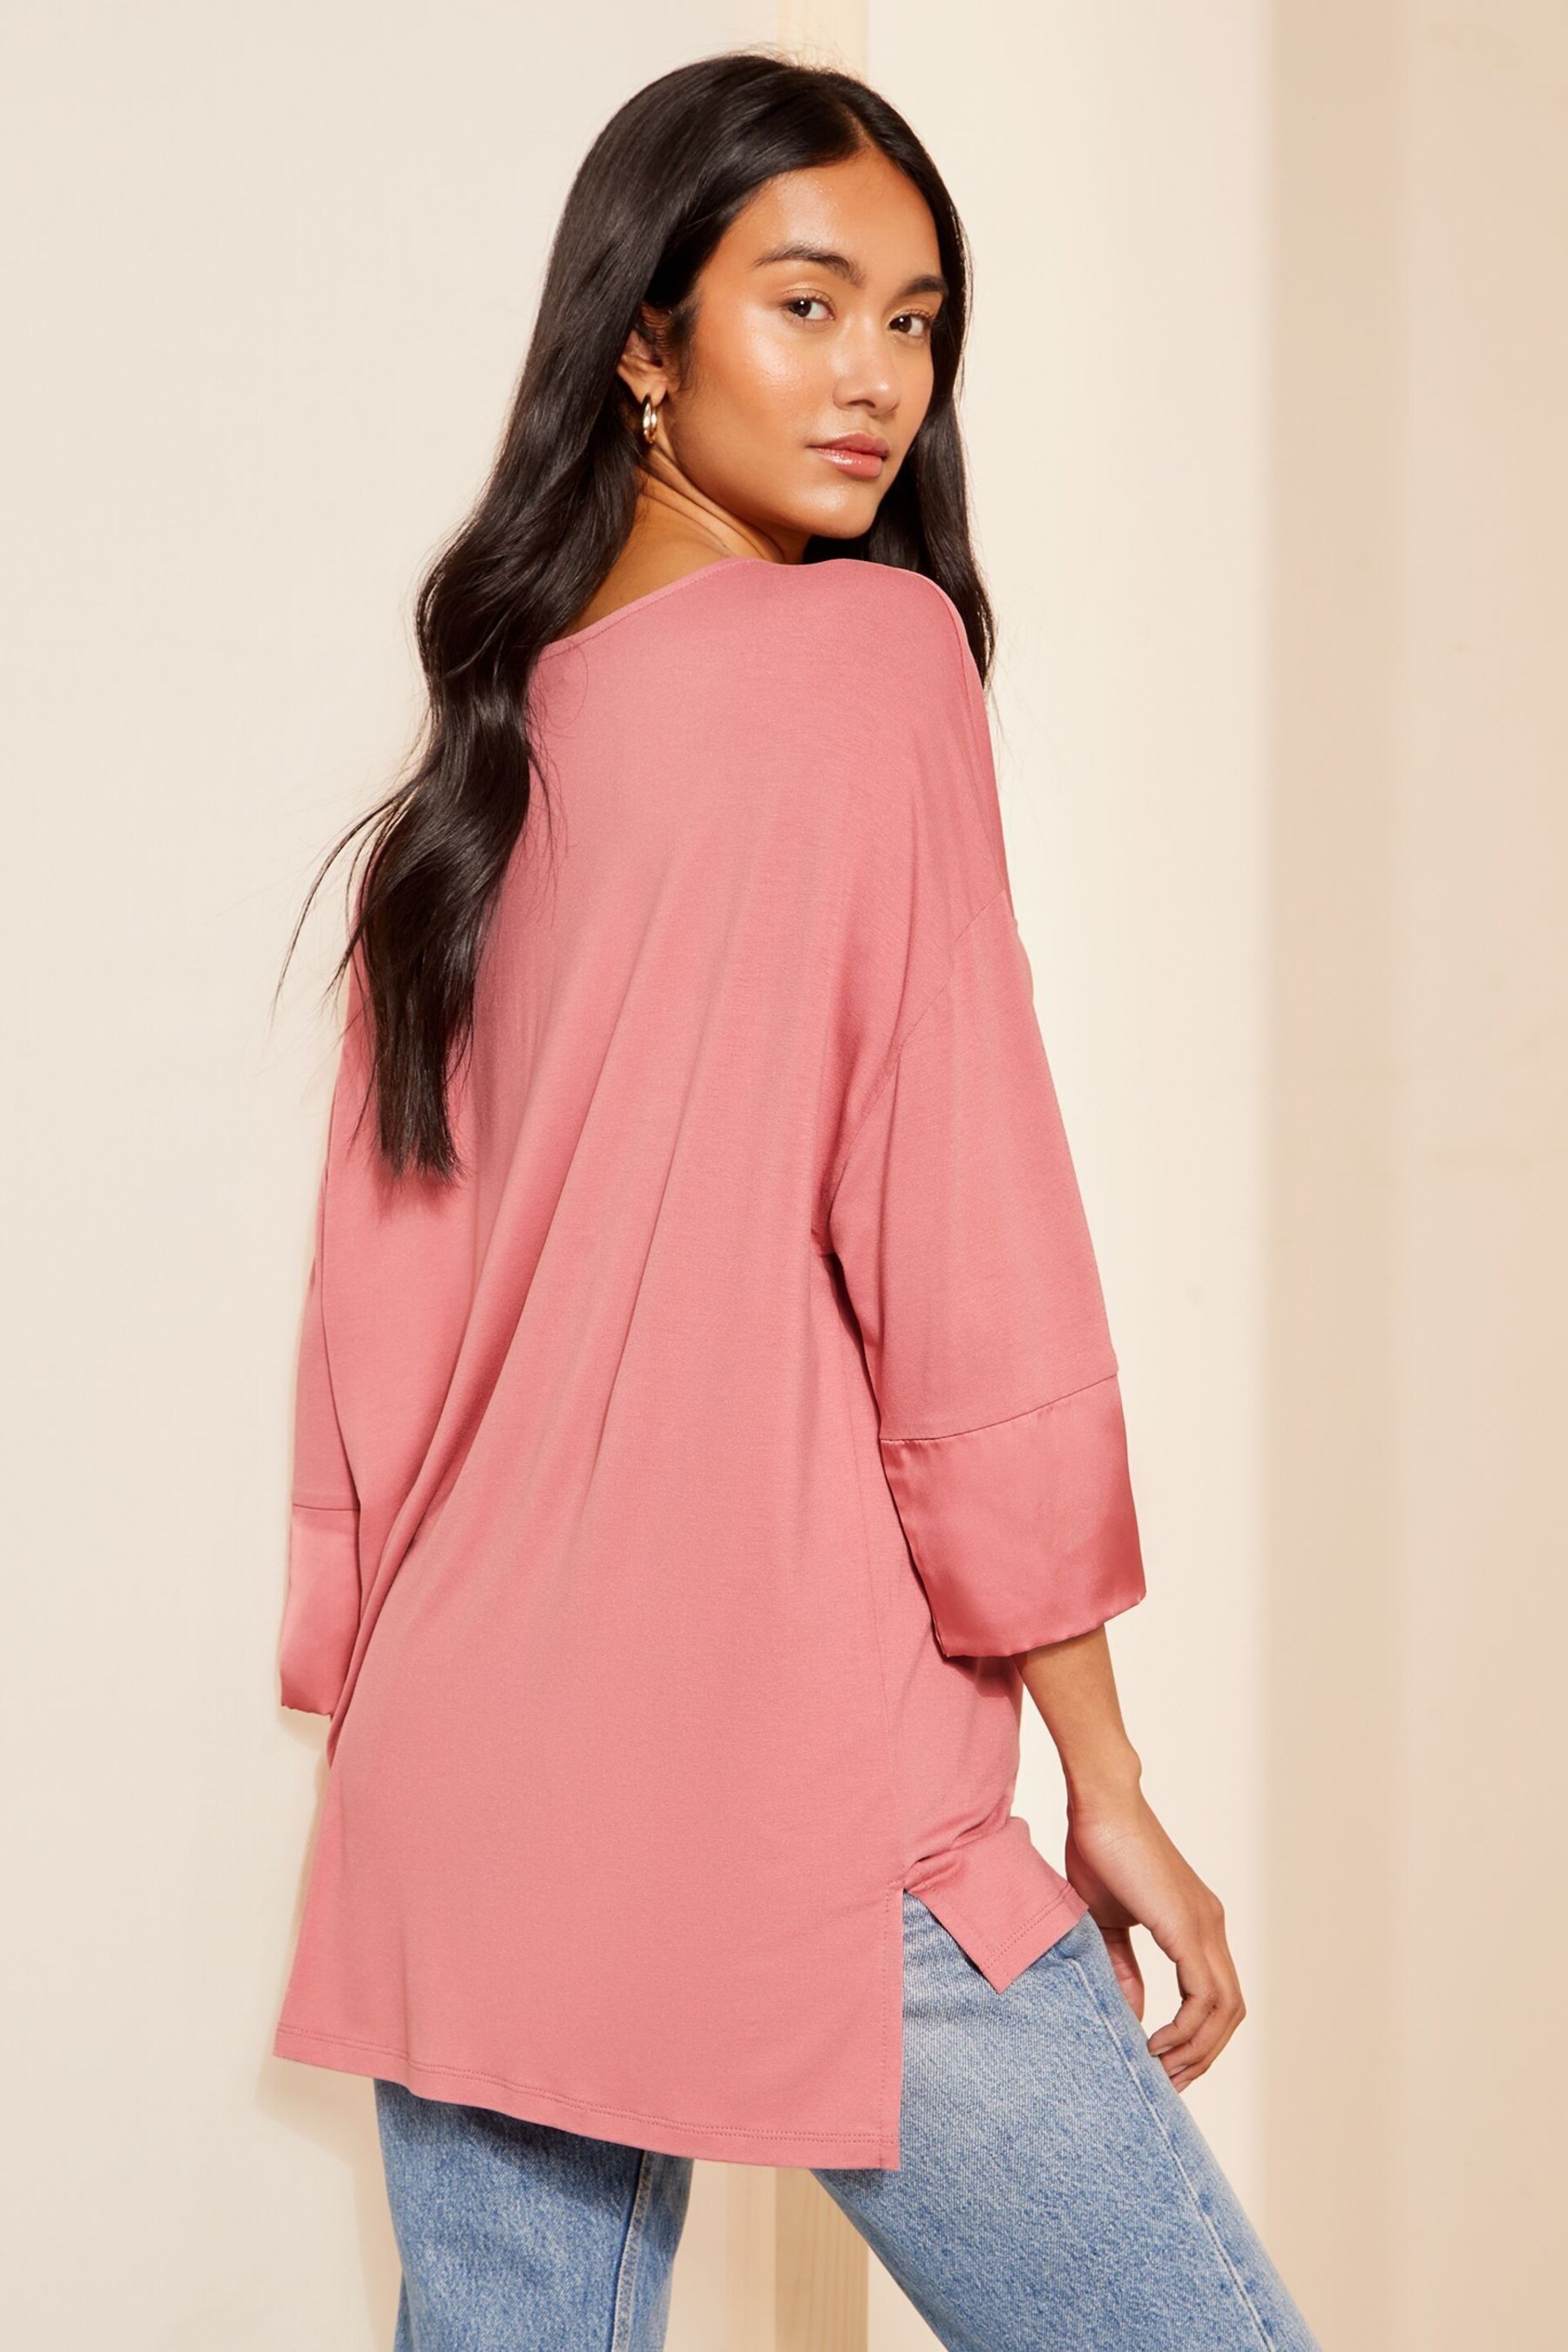 Friends Like These Pink Soft Jersey Long Sleeve Satin Trim Tunic Top - Image 4 of 4